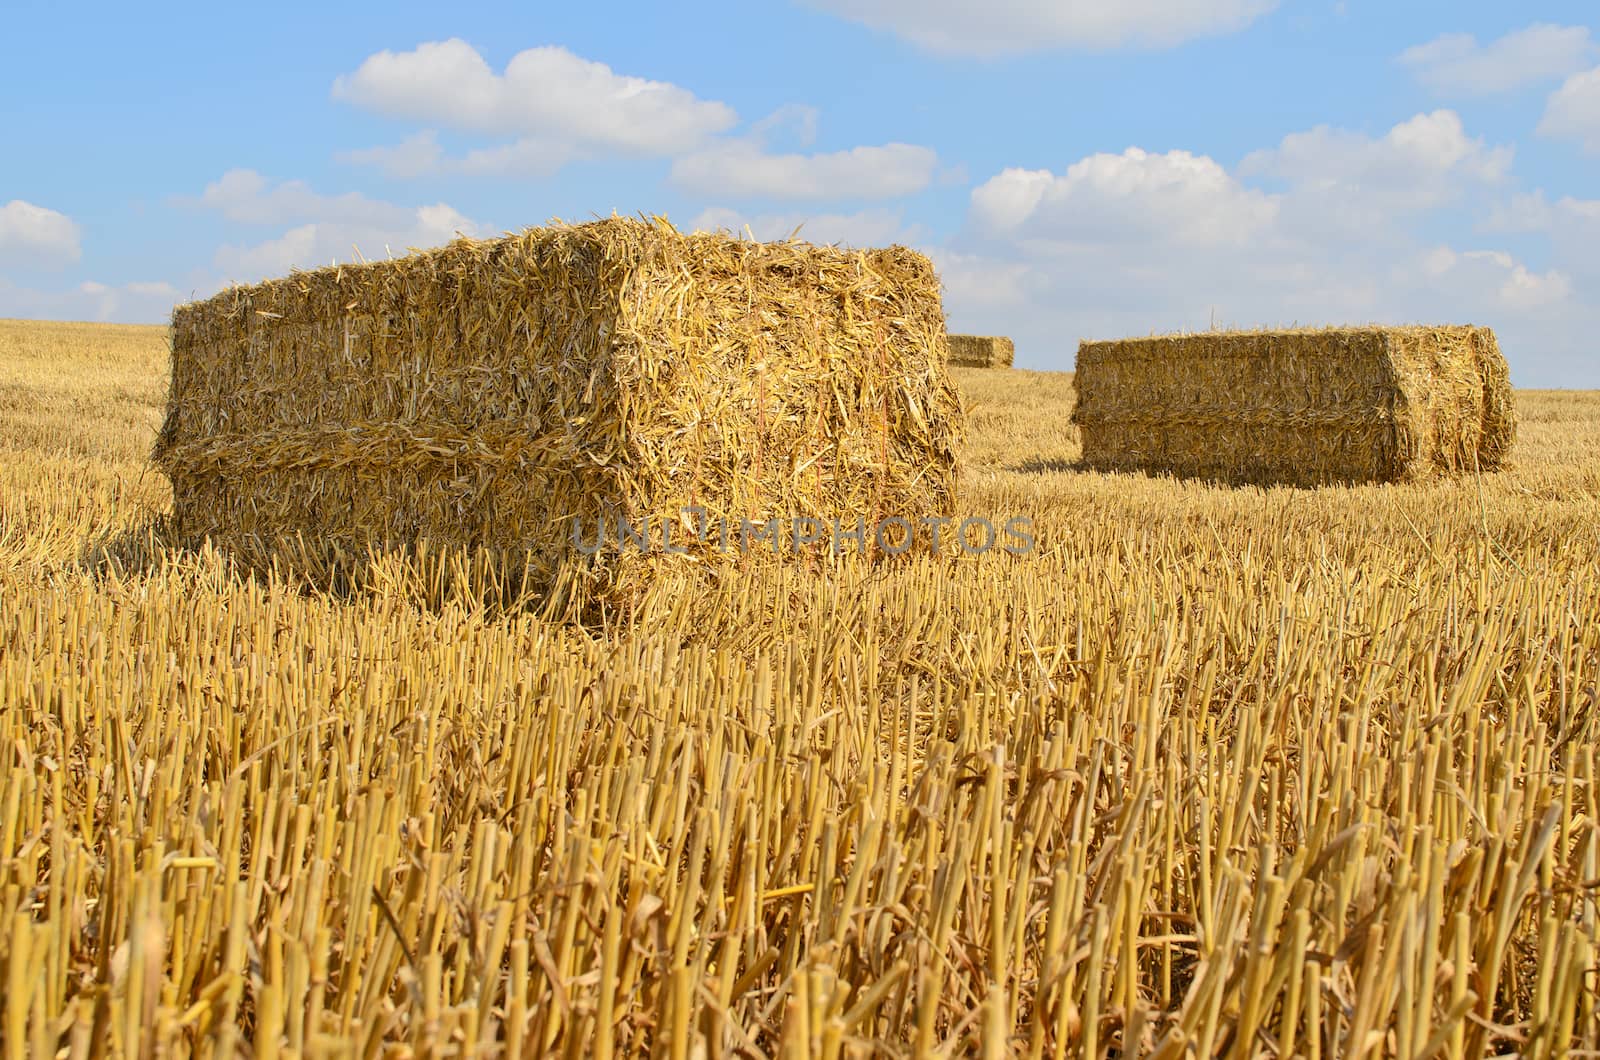 Straw bale drying in the sun after harvest in a golden stubble field.